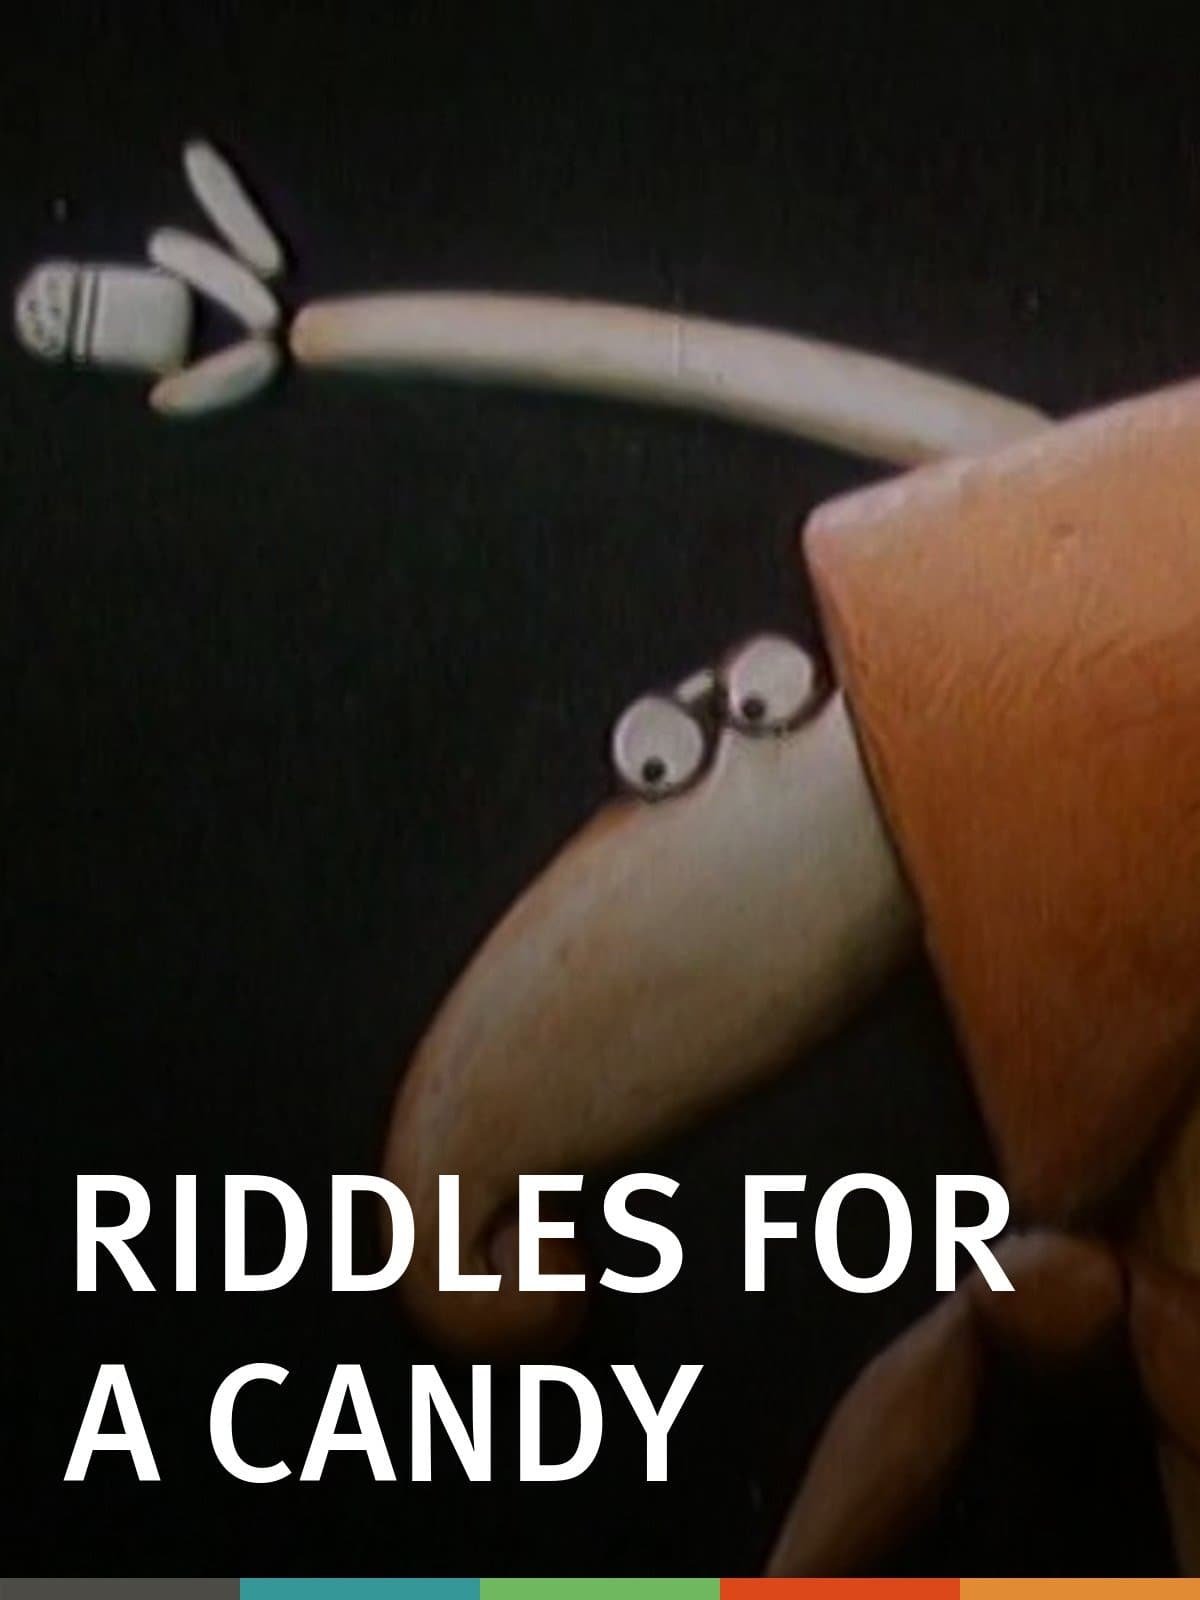 Riddles for a Candy